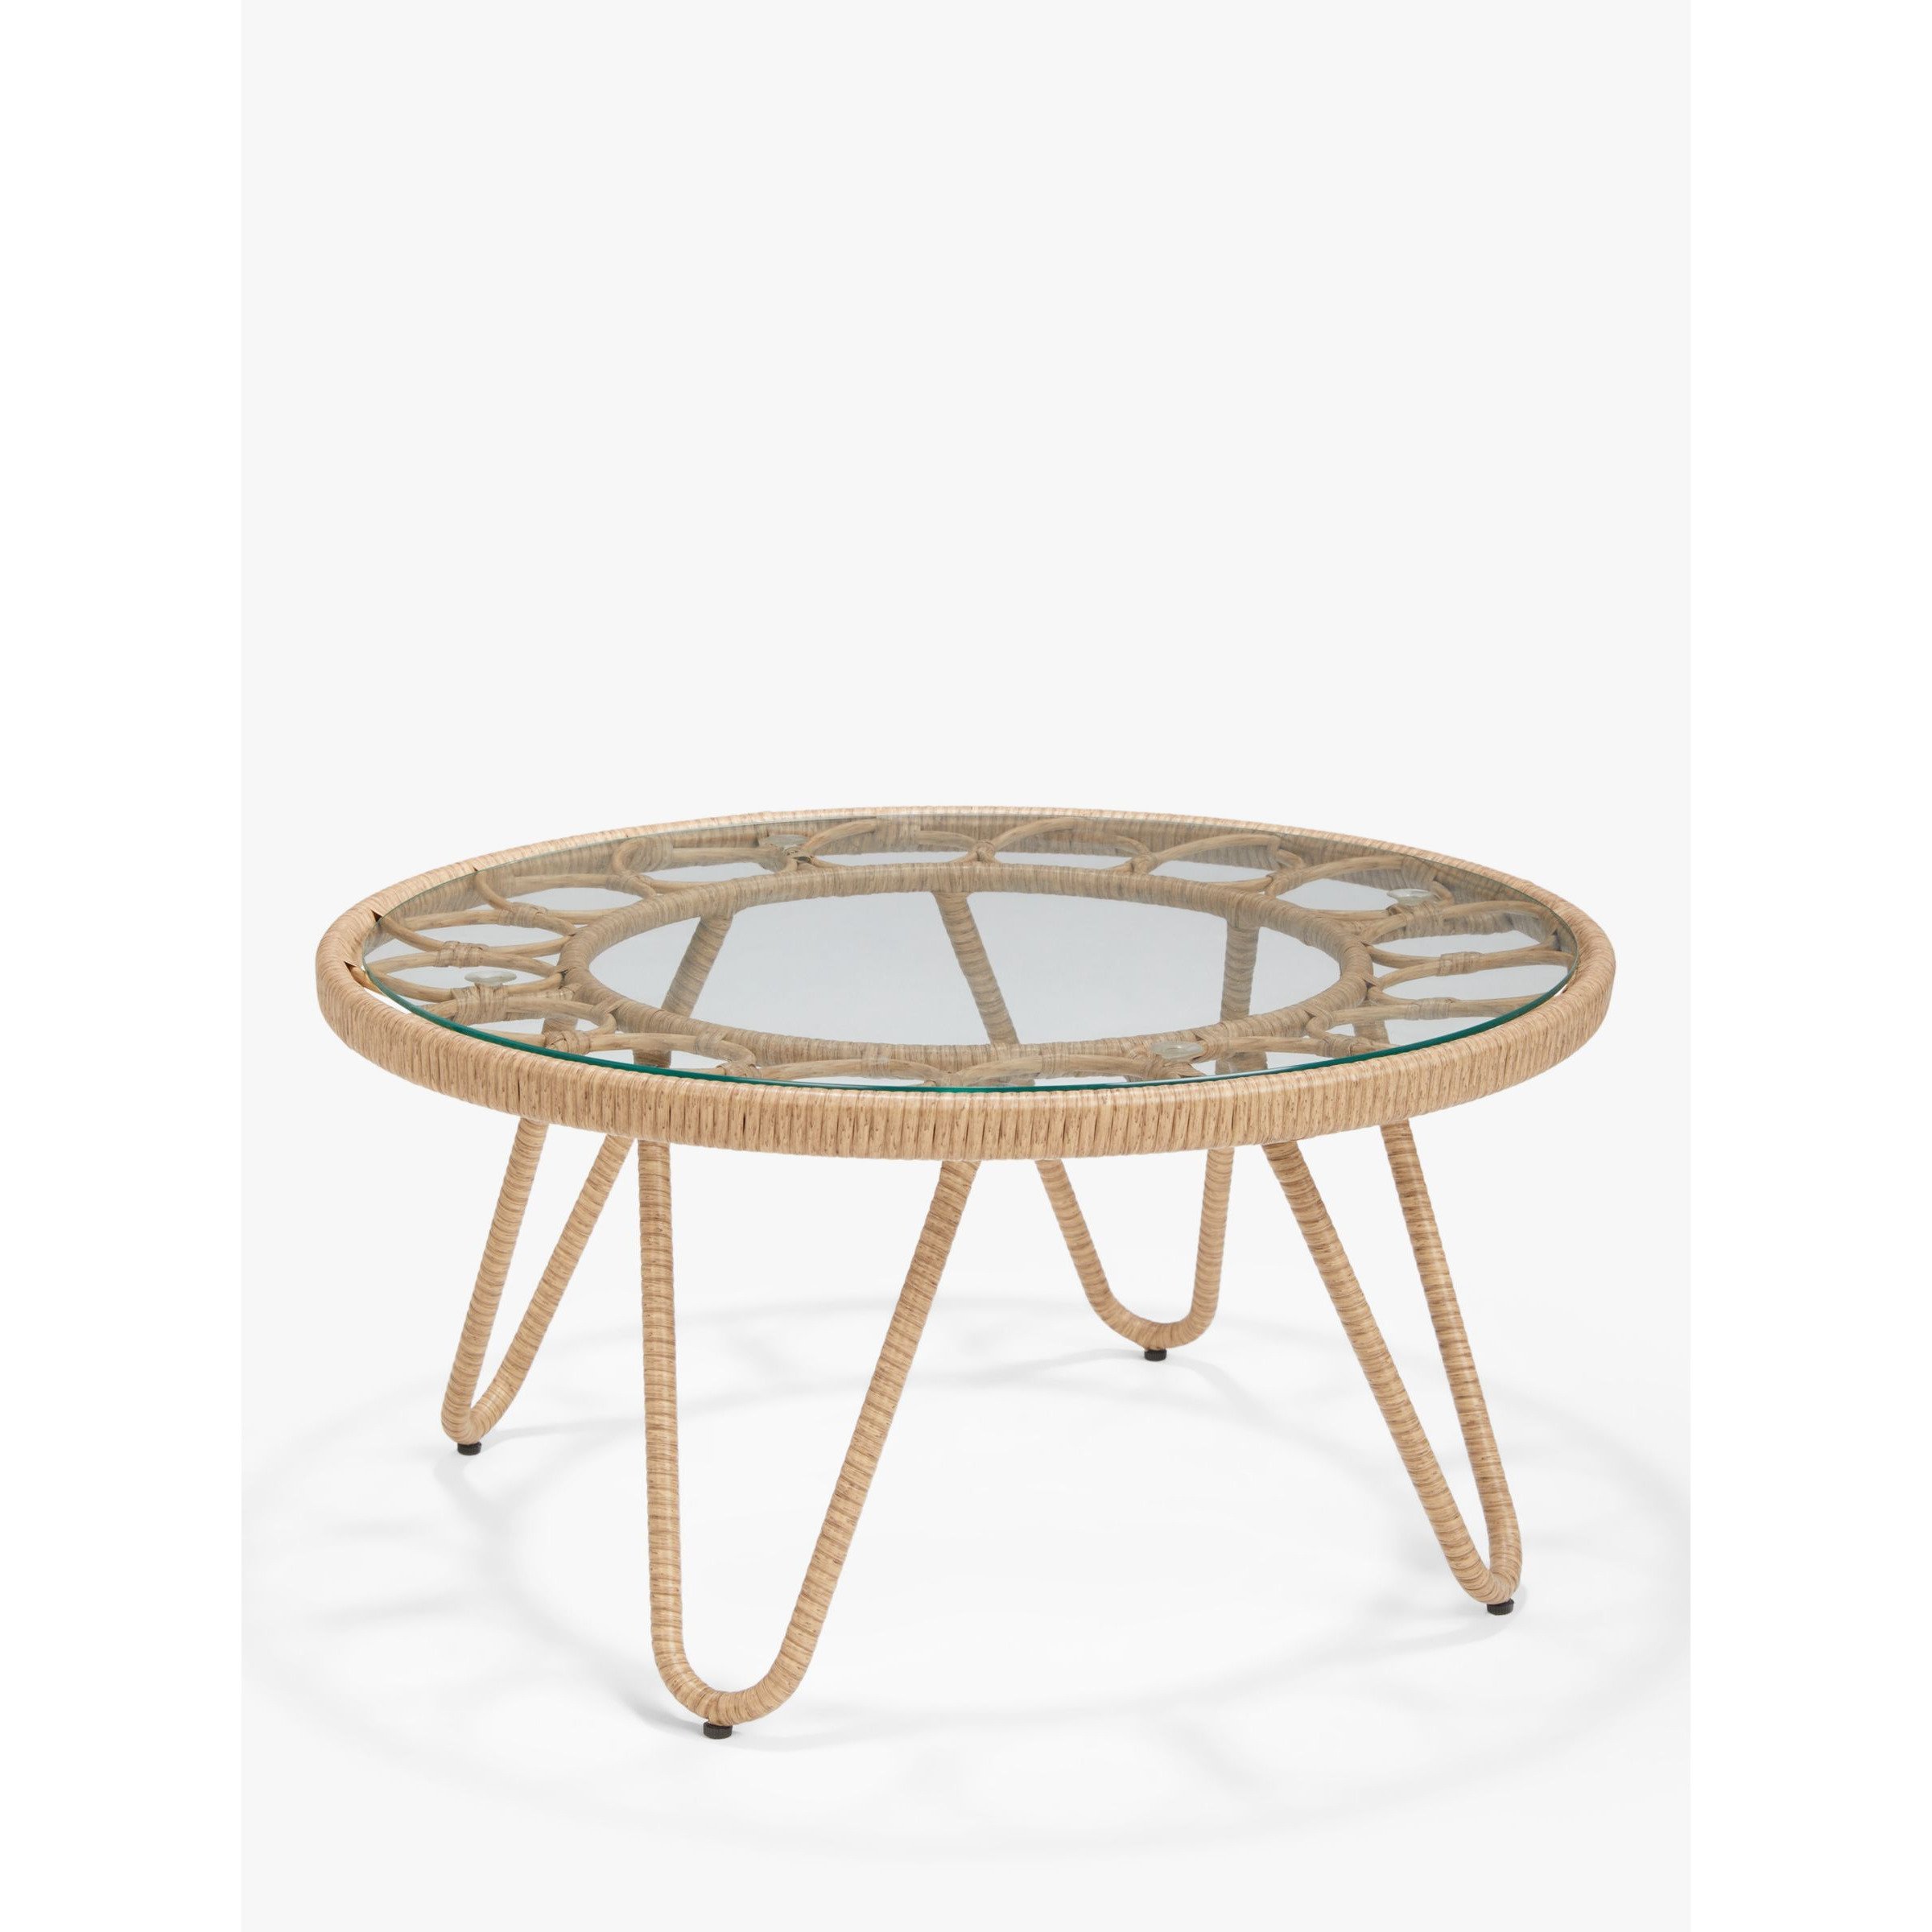 John Lewis Infinity Cane Garden Coffee Table, 75cm, Natural - image 1